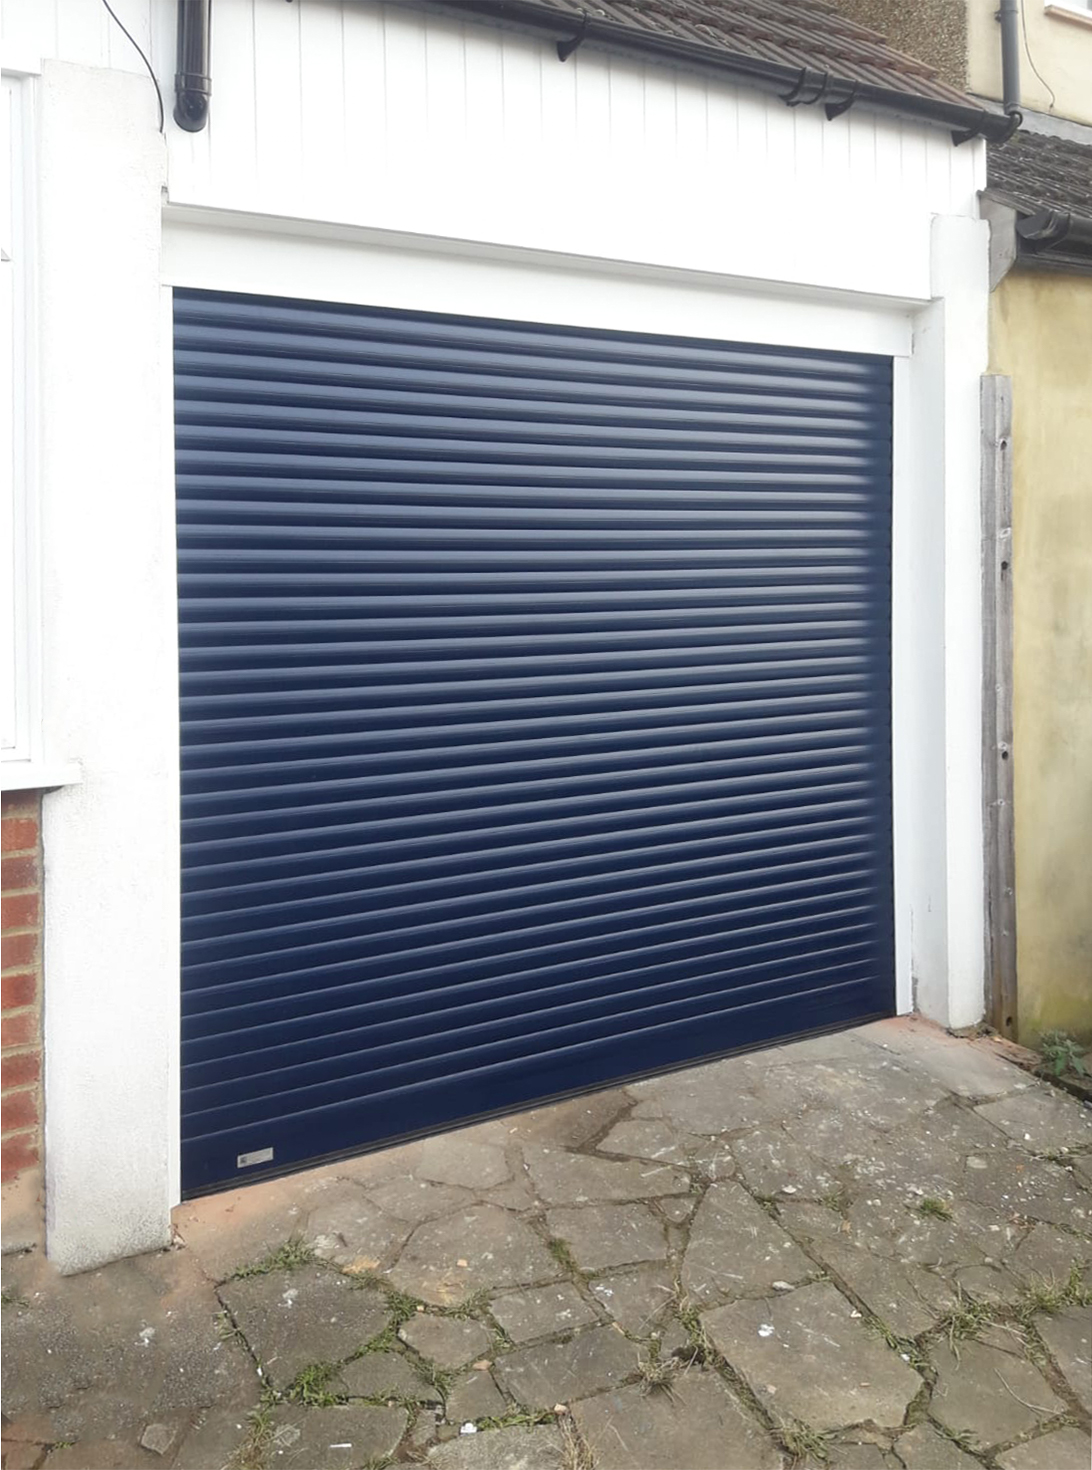 SeceuroGlide Fully Automated Compact Insulated Roller Garage Door finished In Navy Blue